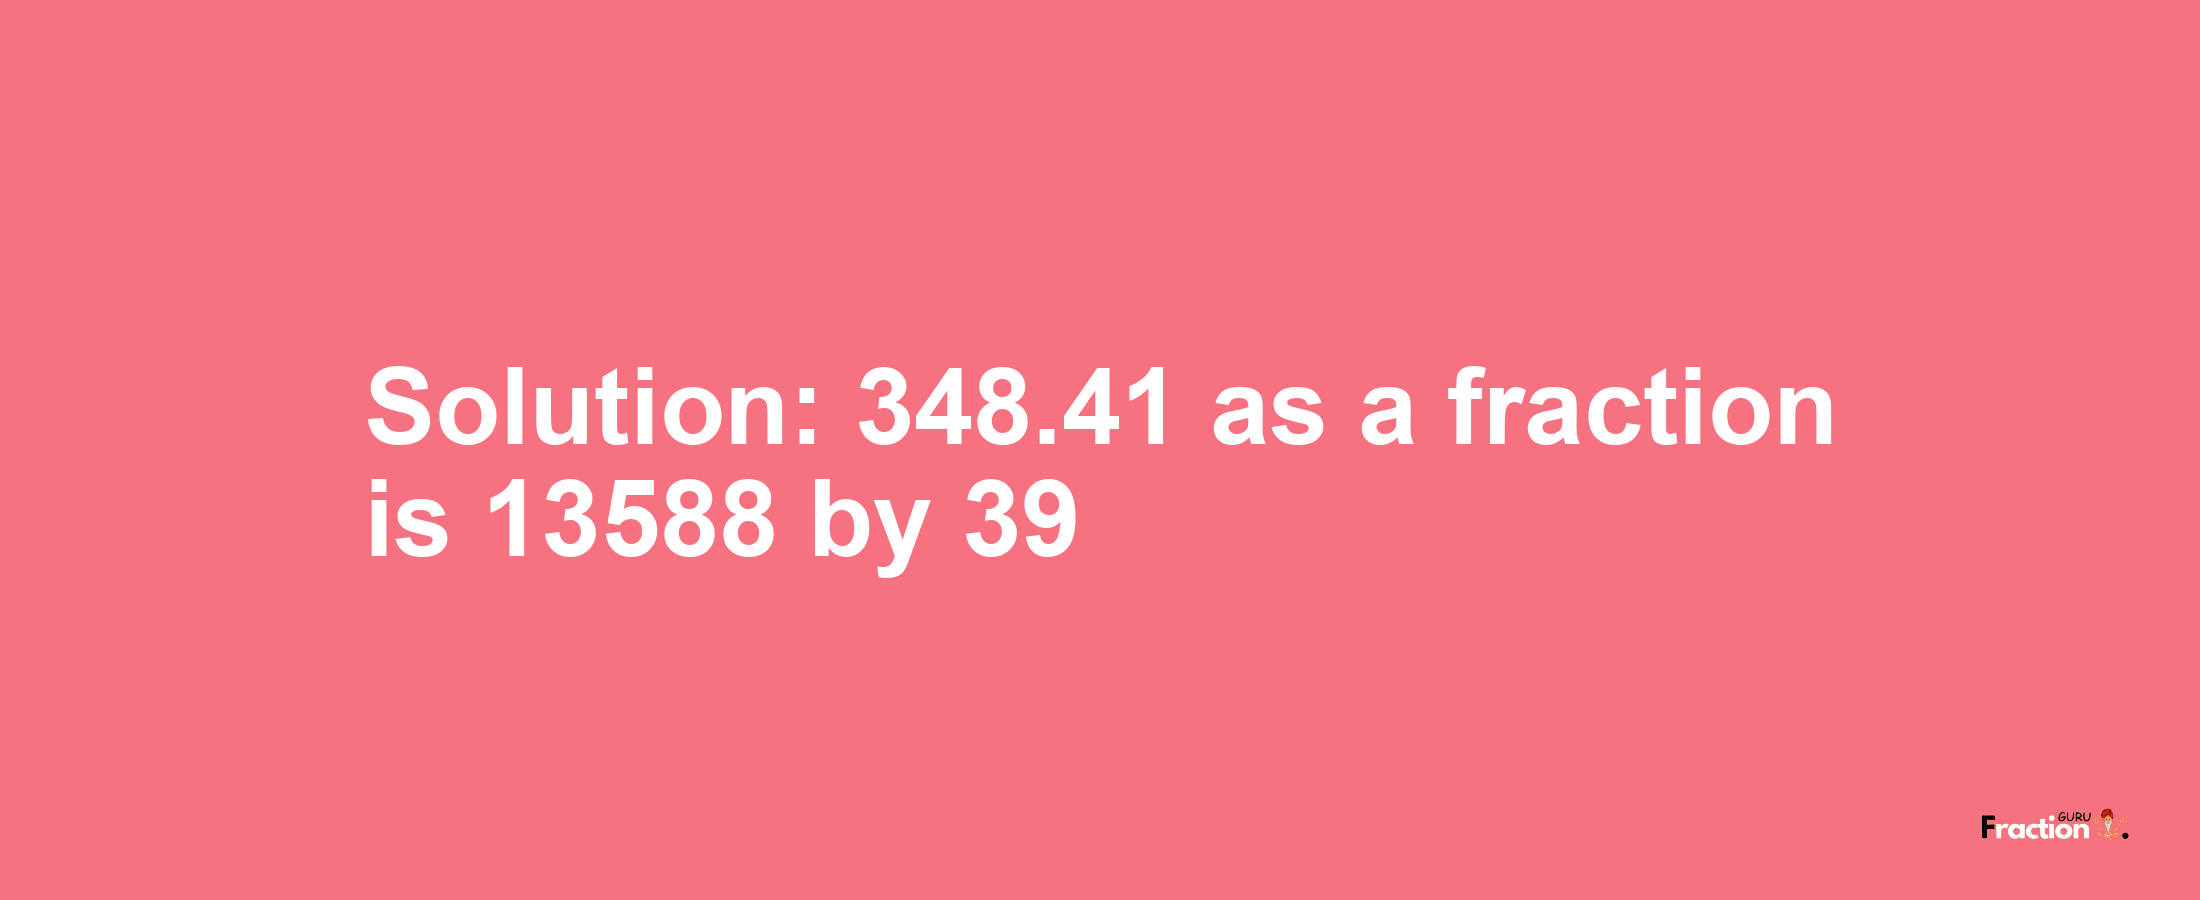 Solution:348.41 as a fraction is 13588/39